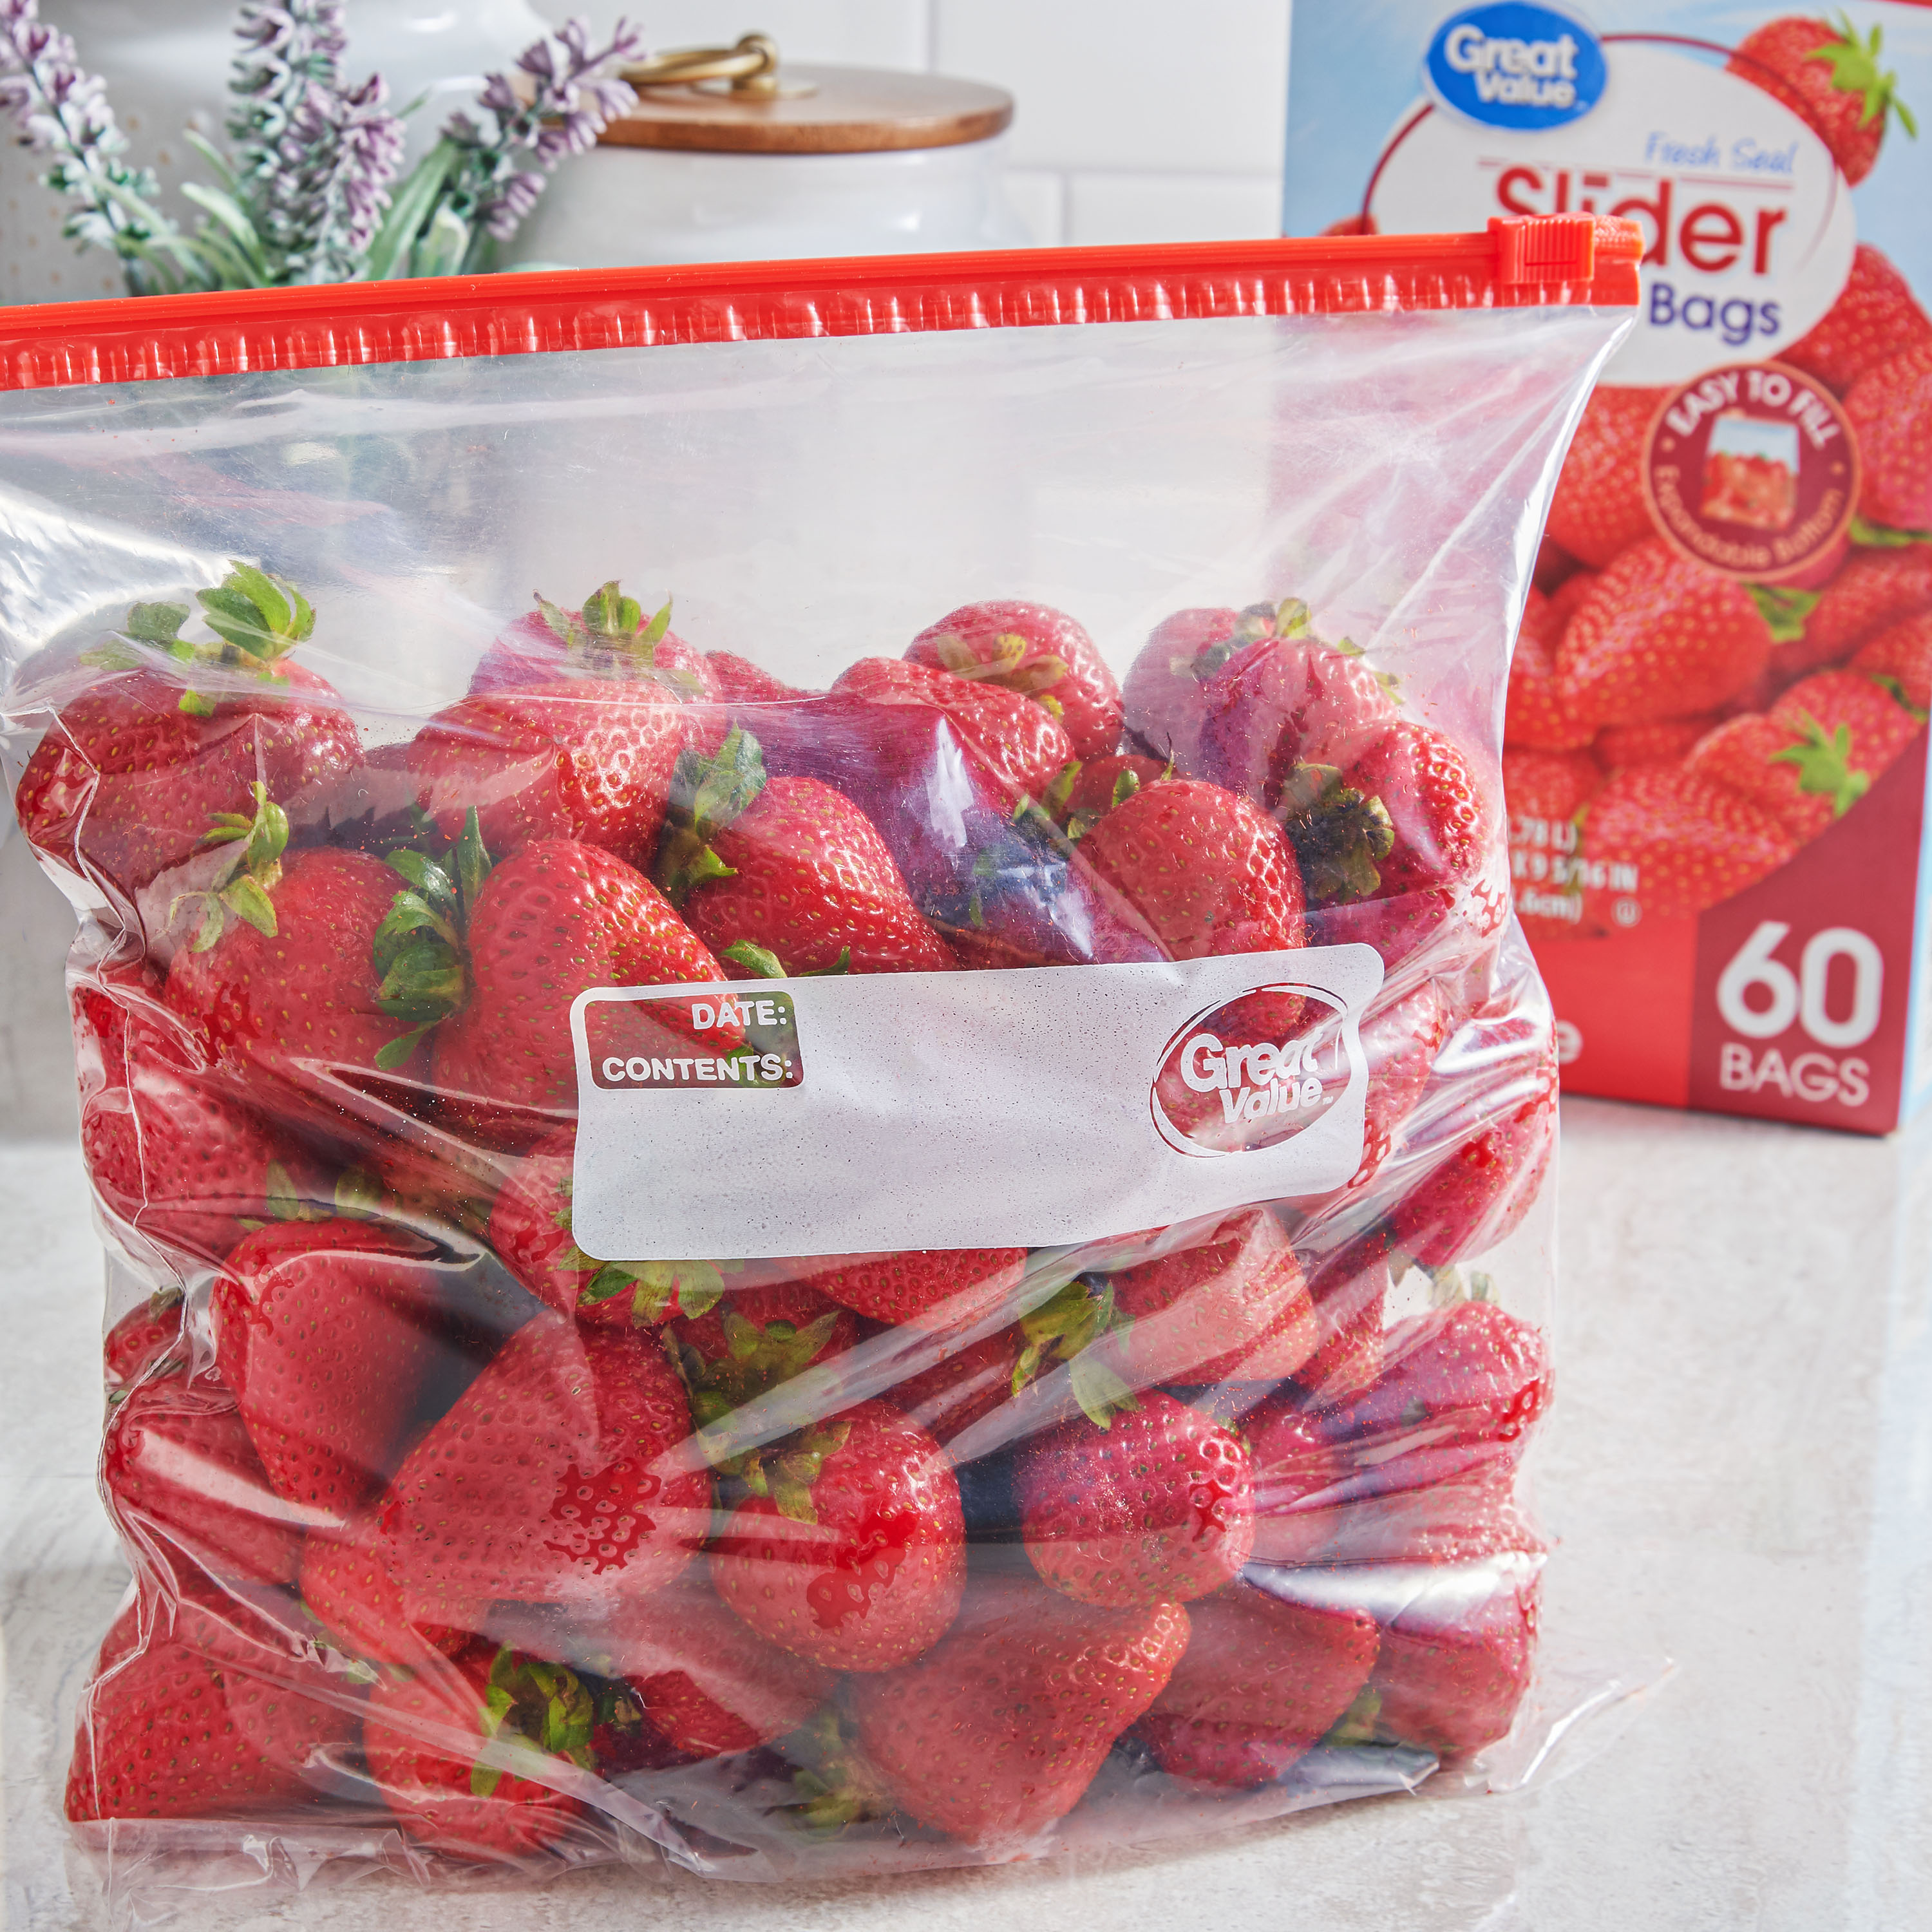 Great Value Fresh Seal Slider Zipper Bags, Gallon Storage, 60 Count - image 5 of 8